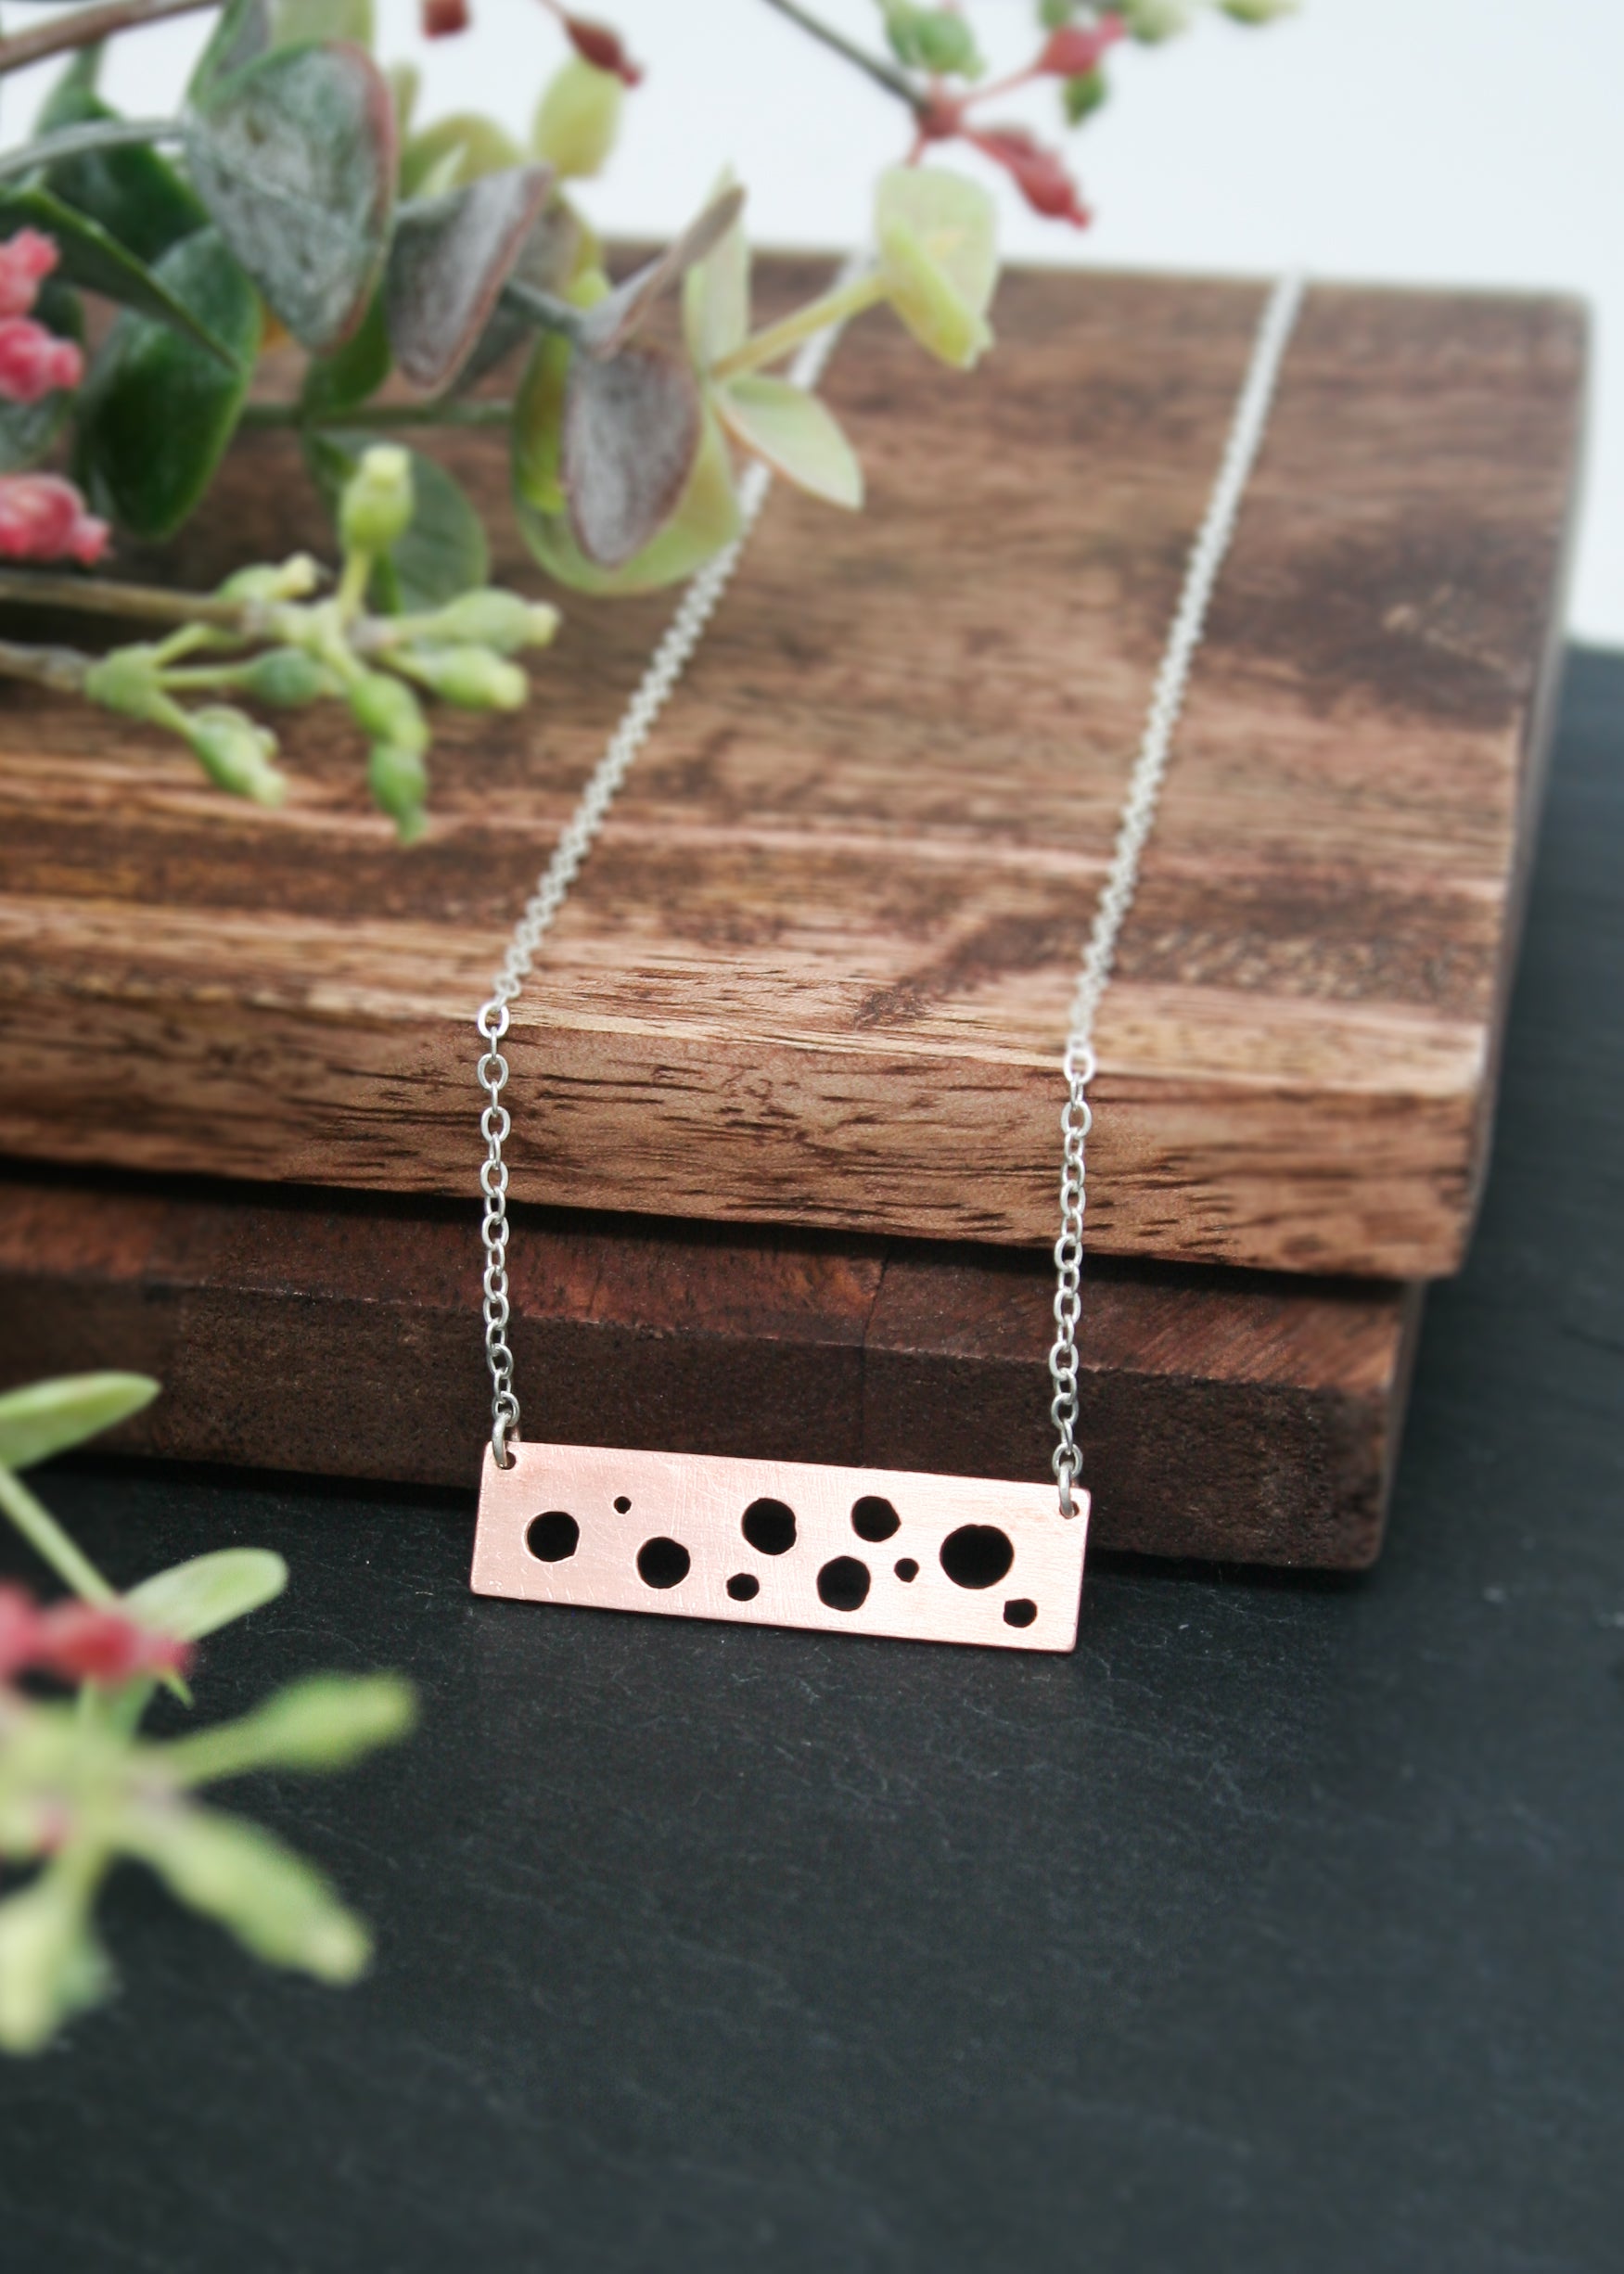 a silver necklace with black dots on it